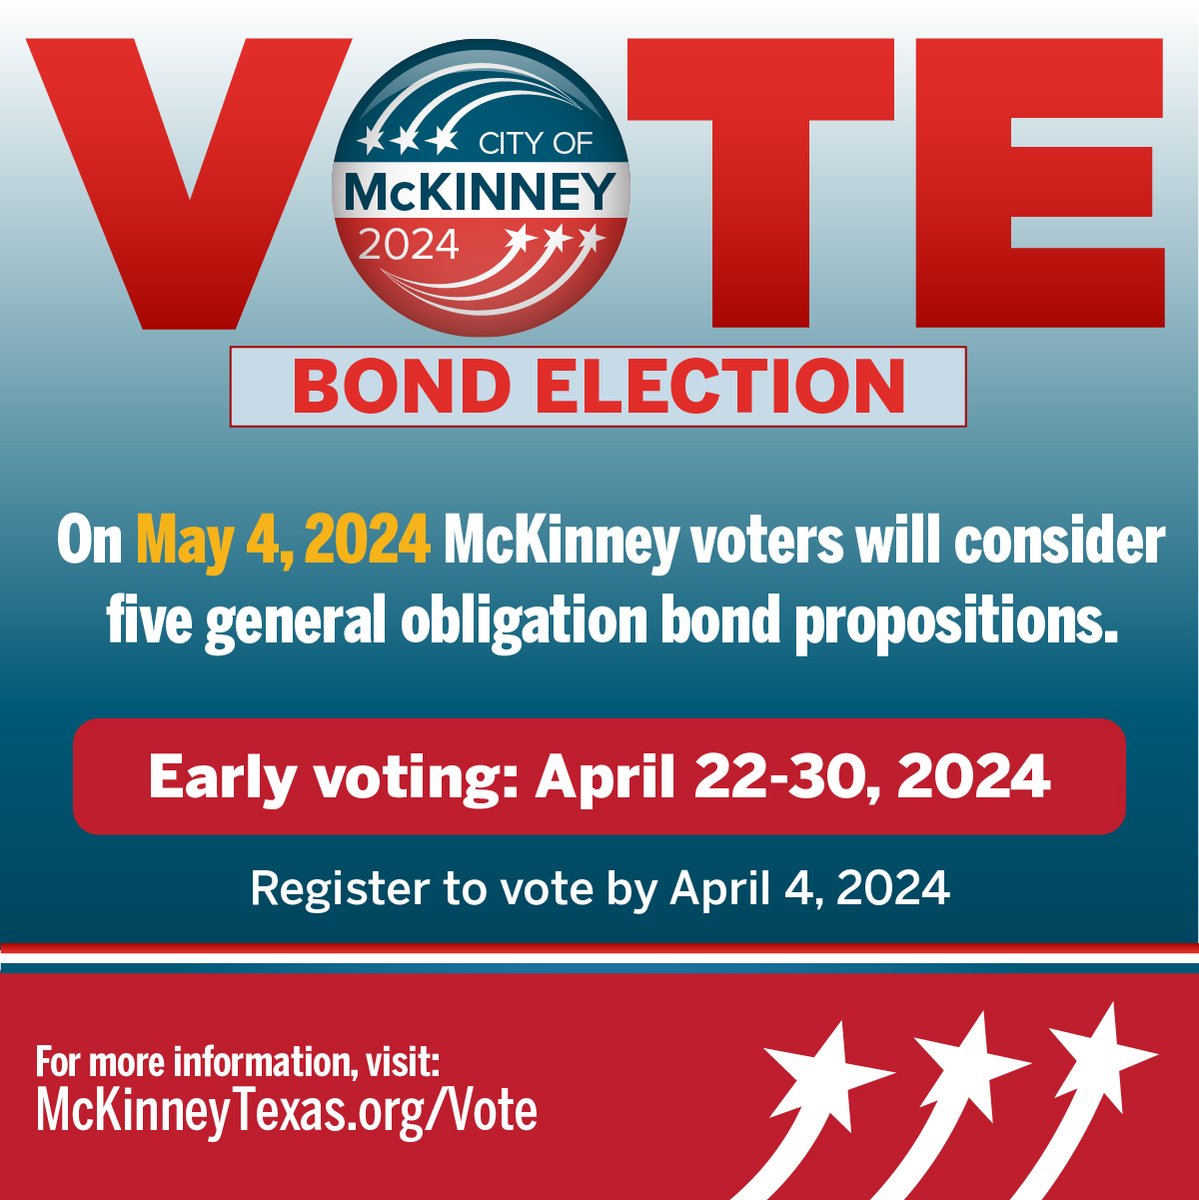 Register to vote by April 4 to be eligible to vote in the City of McKinney's May 4 election. Voter information: McKinneyTexas.org/Vote Learn more about the five general obligation bond propositions: McKinneyTexas.org/2024Bond